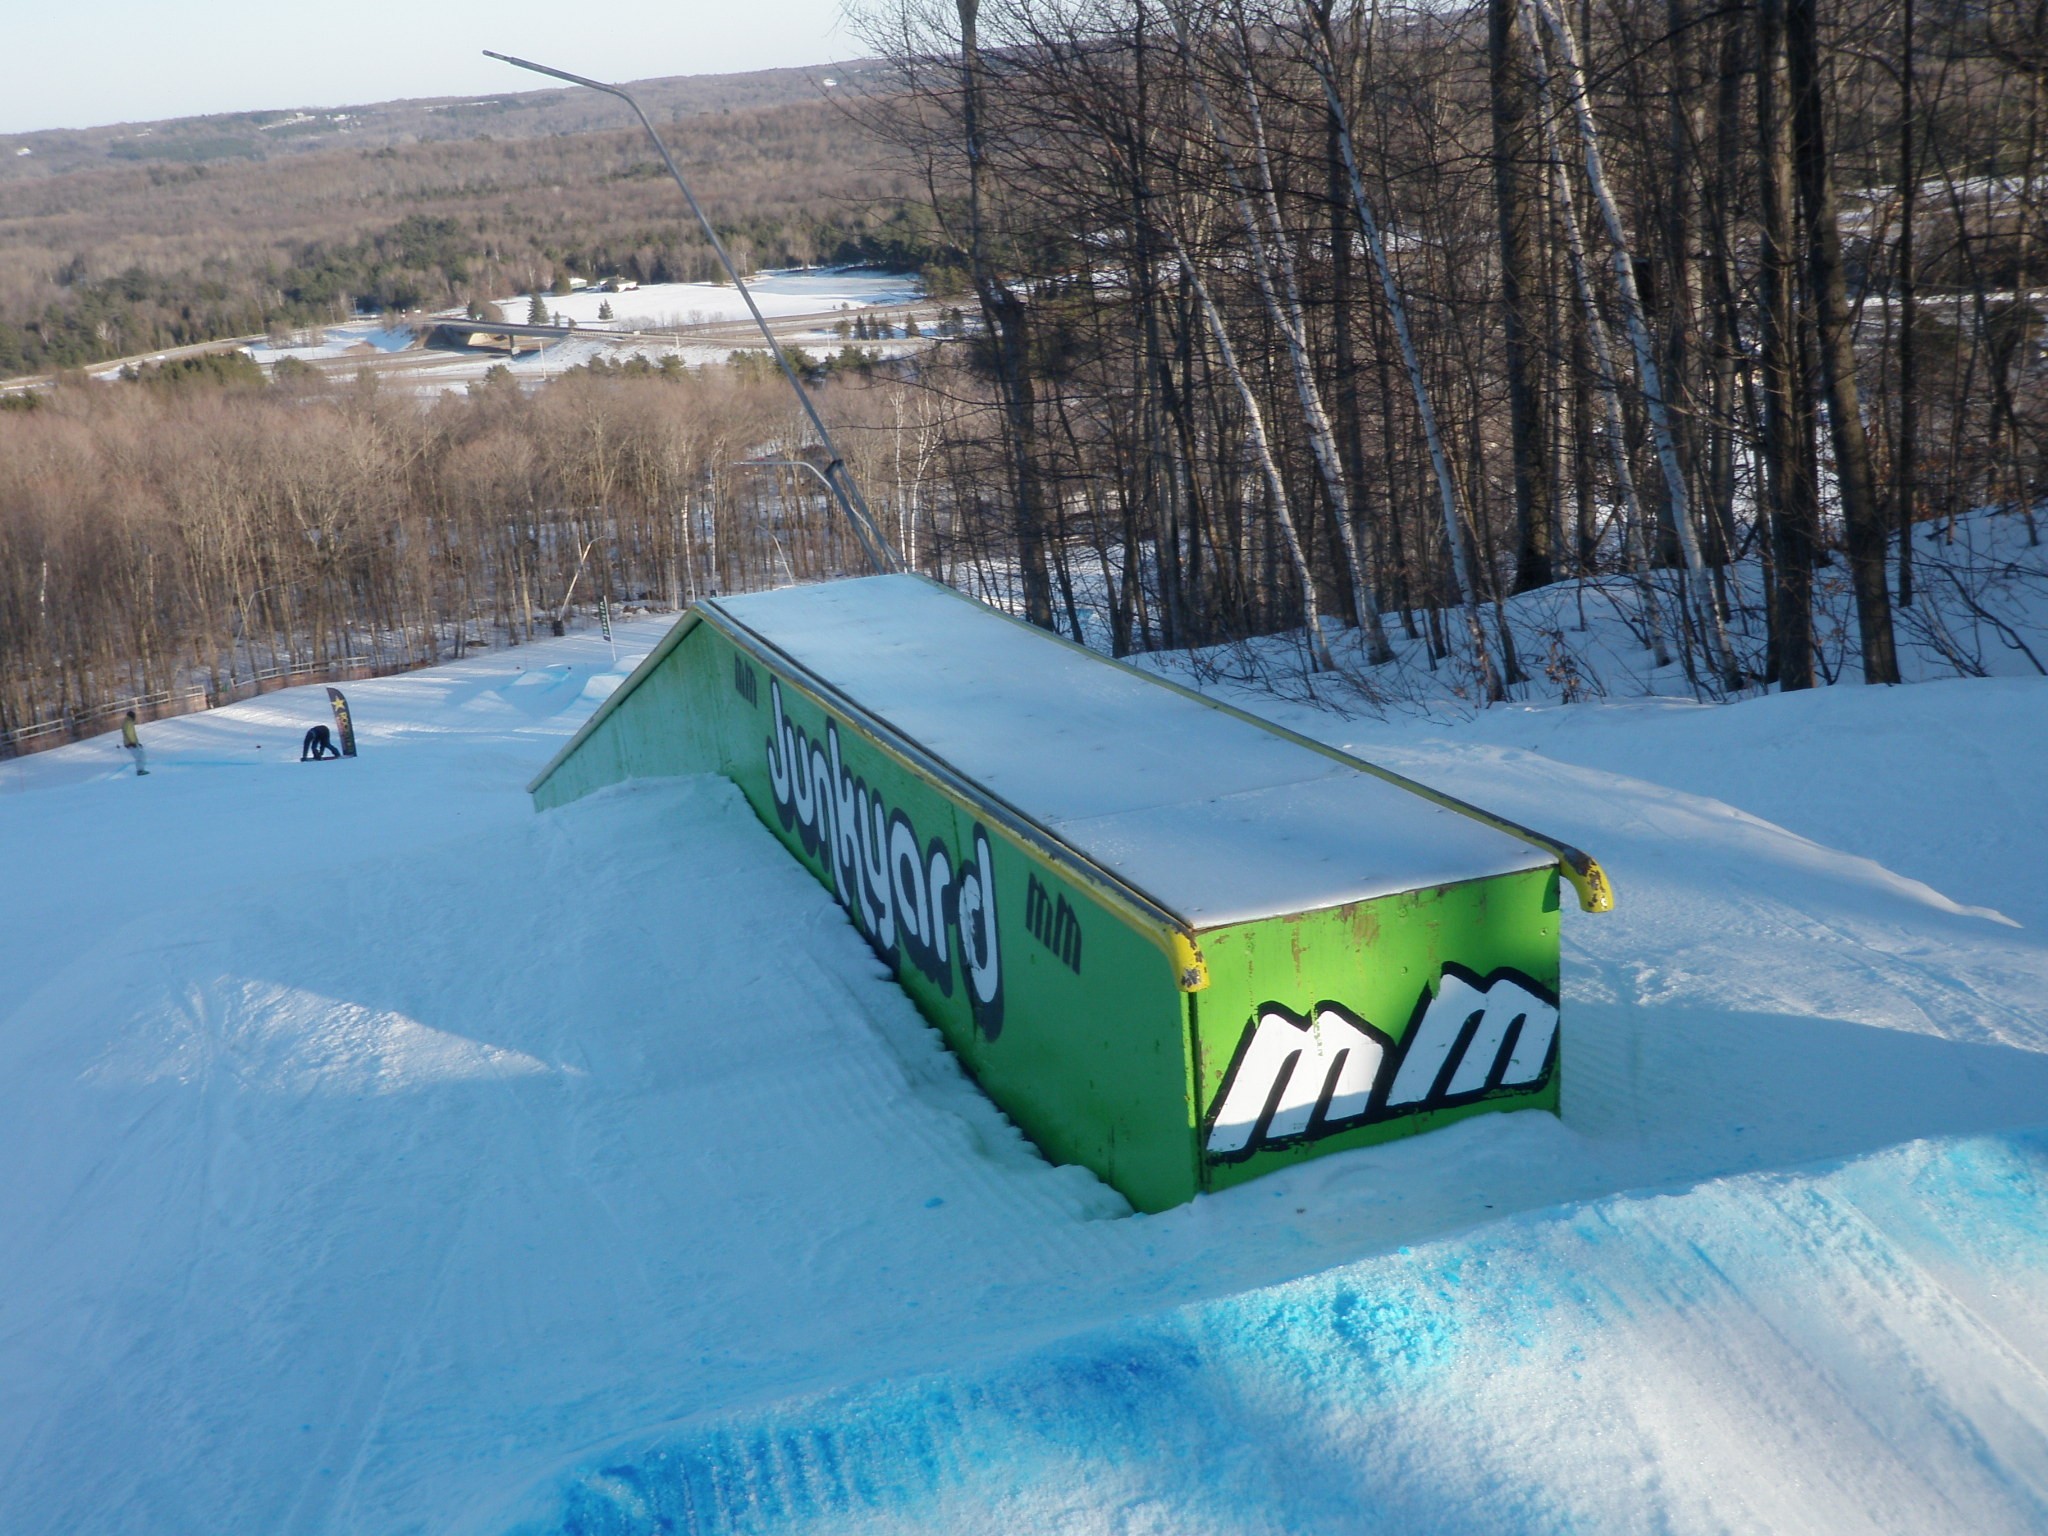 NEW Freestyle Skiing Competitive Team and Head Coach Announced! - Mount St. Louis Moonstone